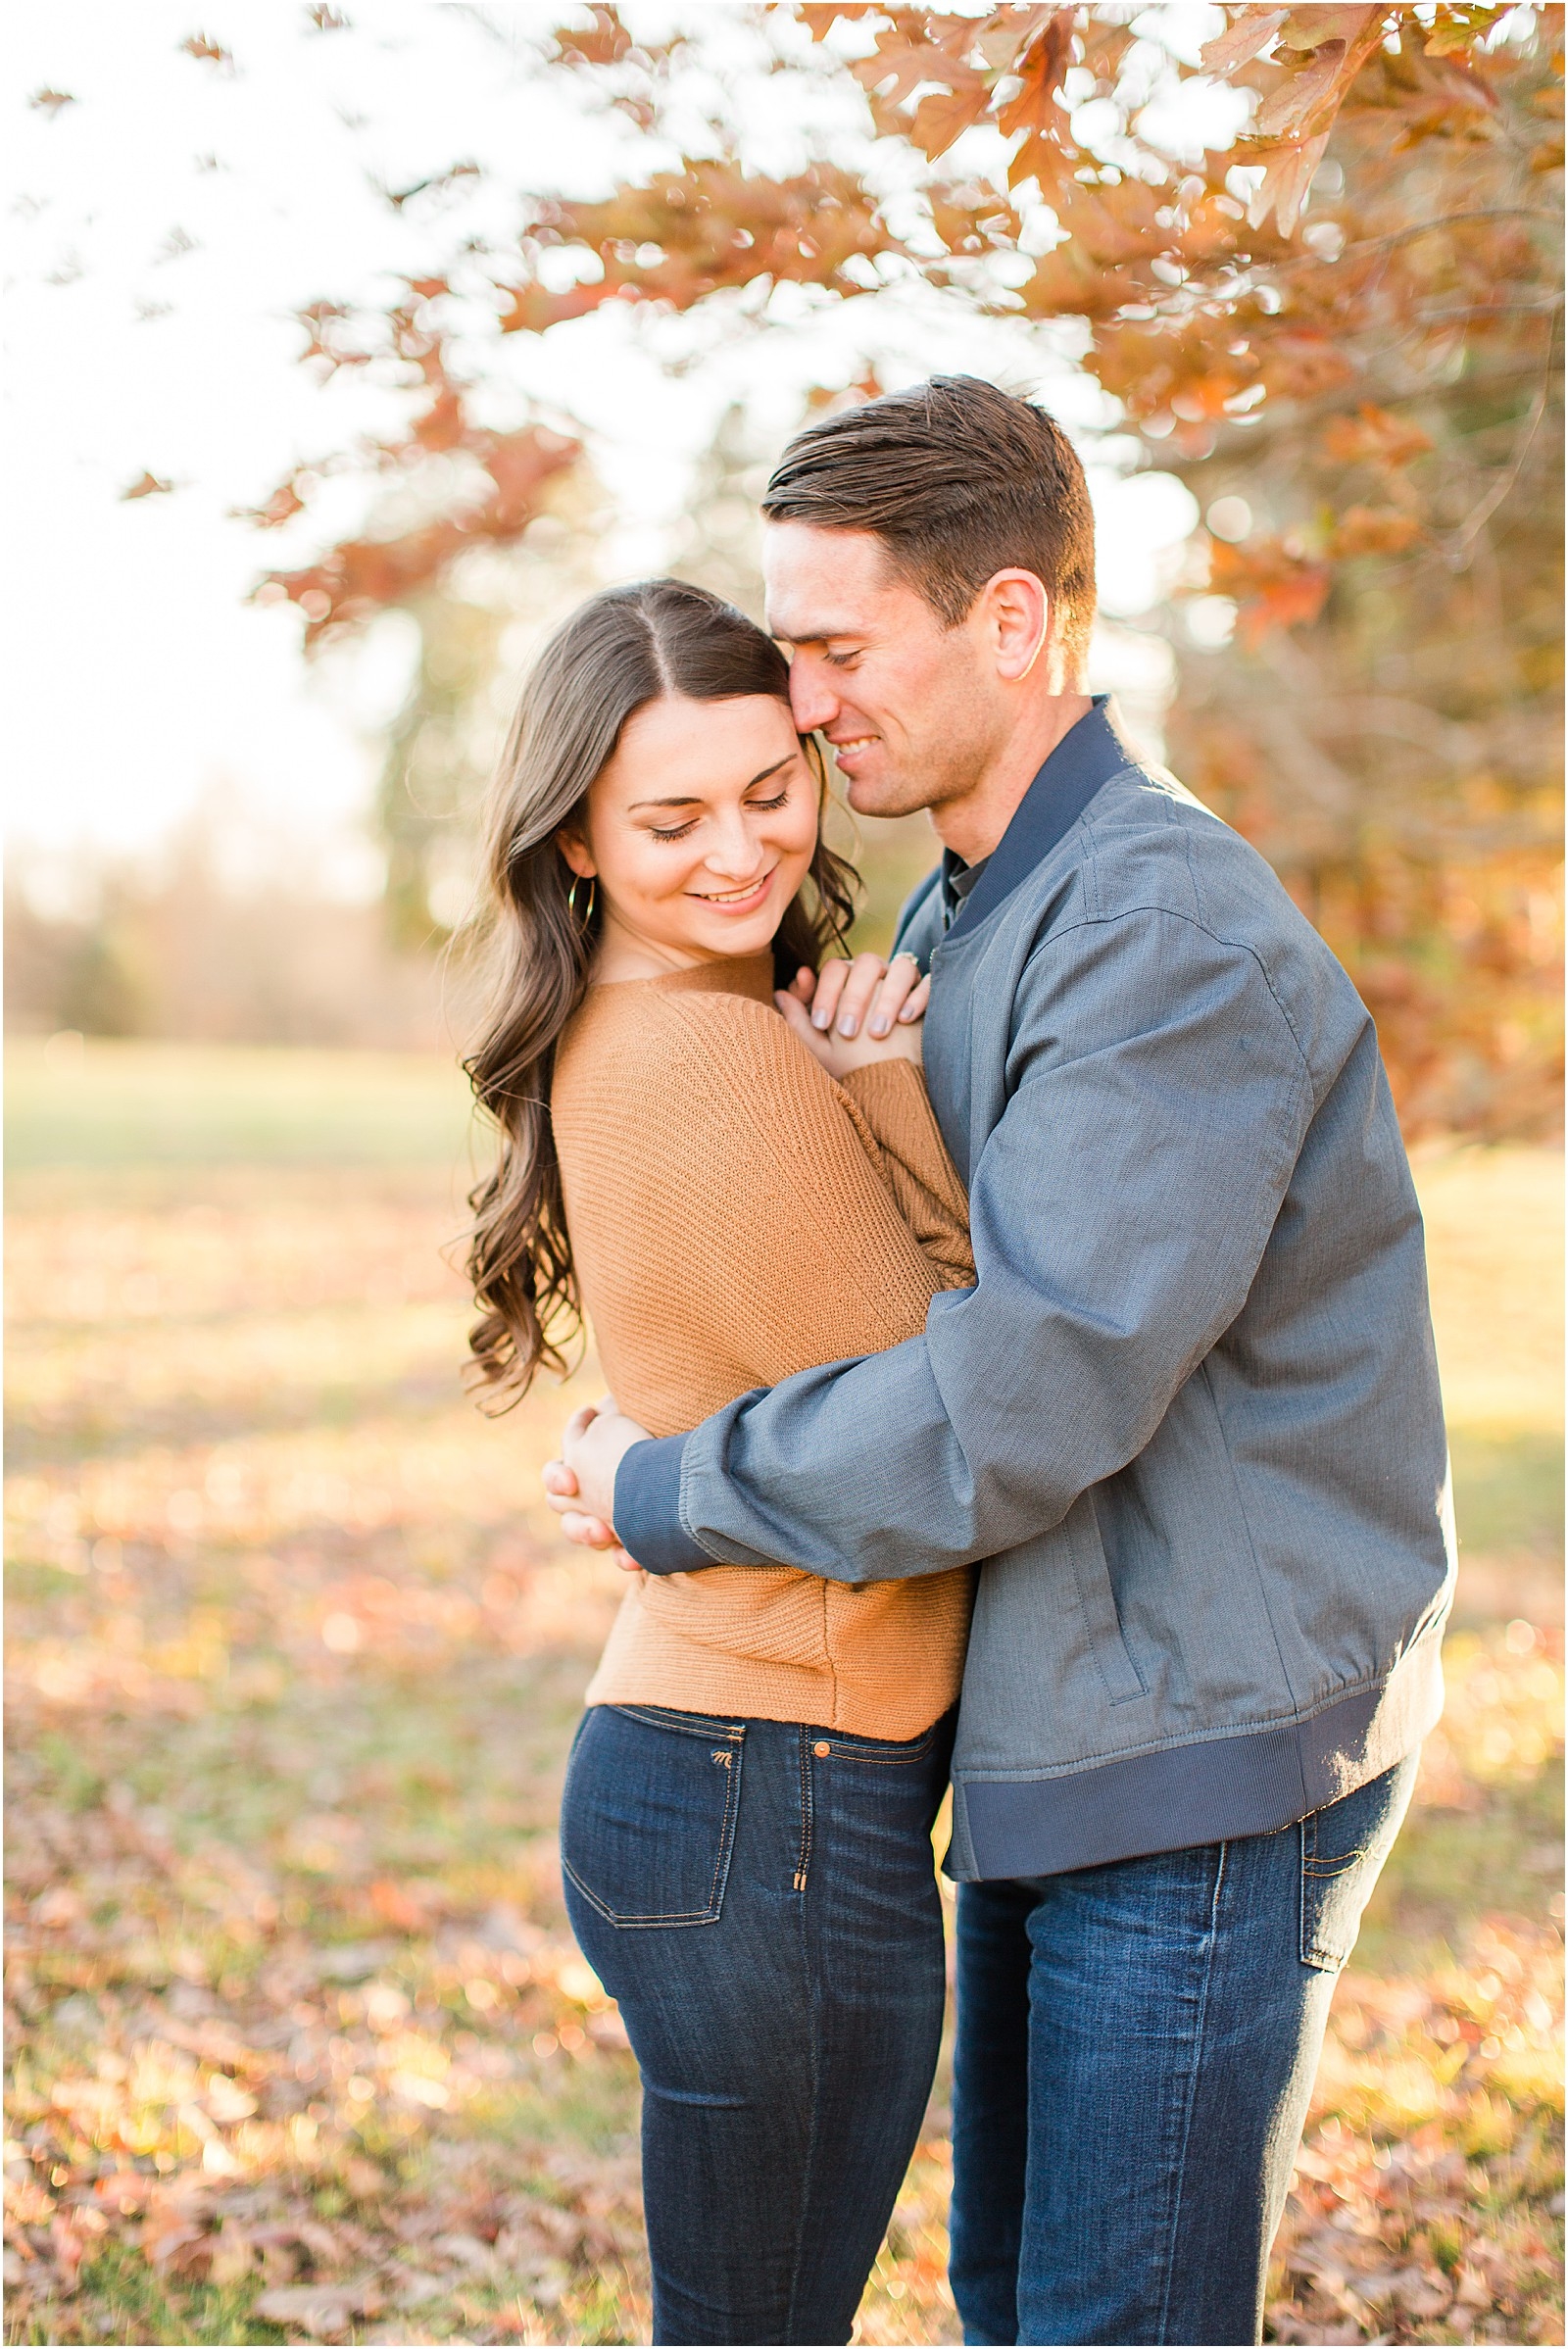 A Sweet Fall Engagement Session in Evansville, Indiana | Bret and ...